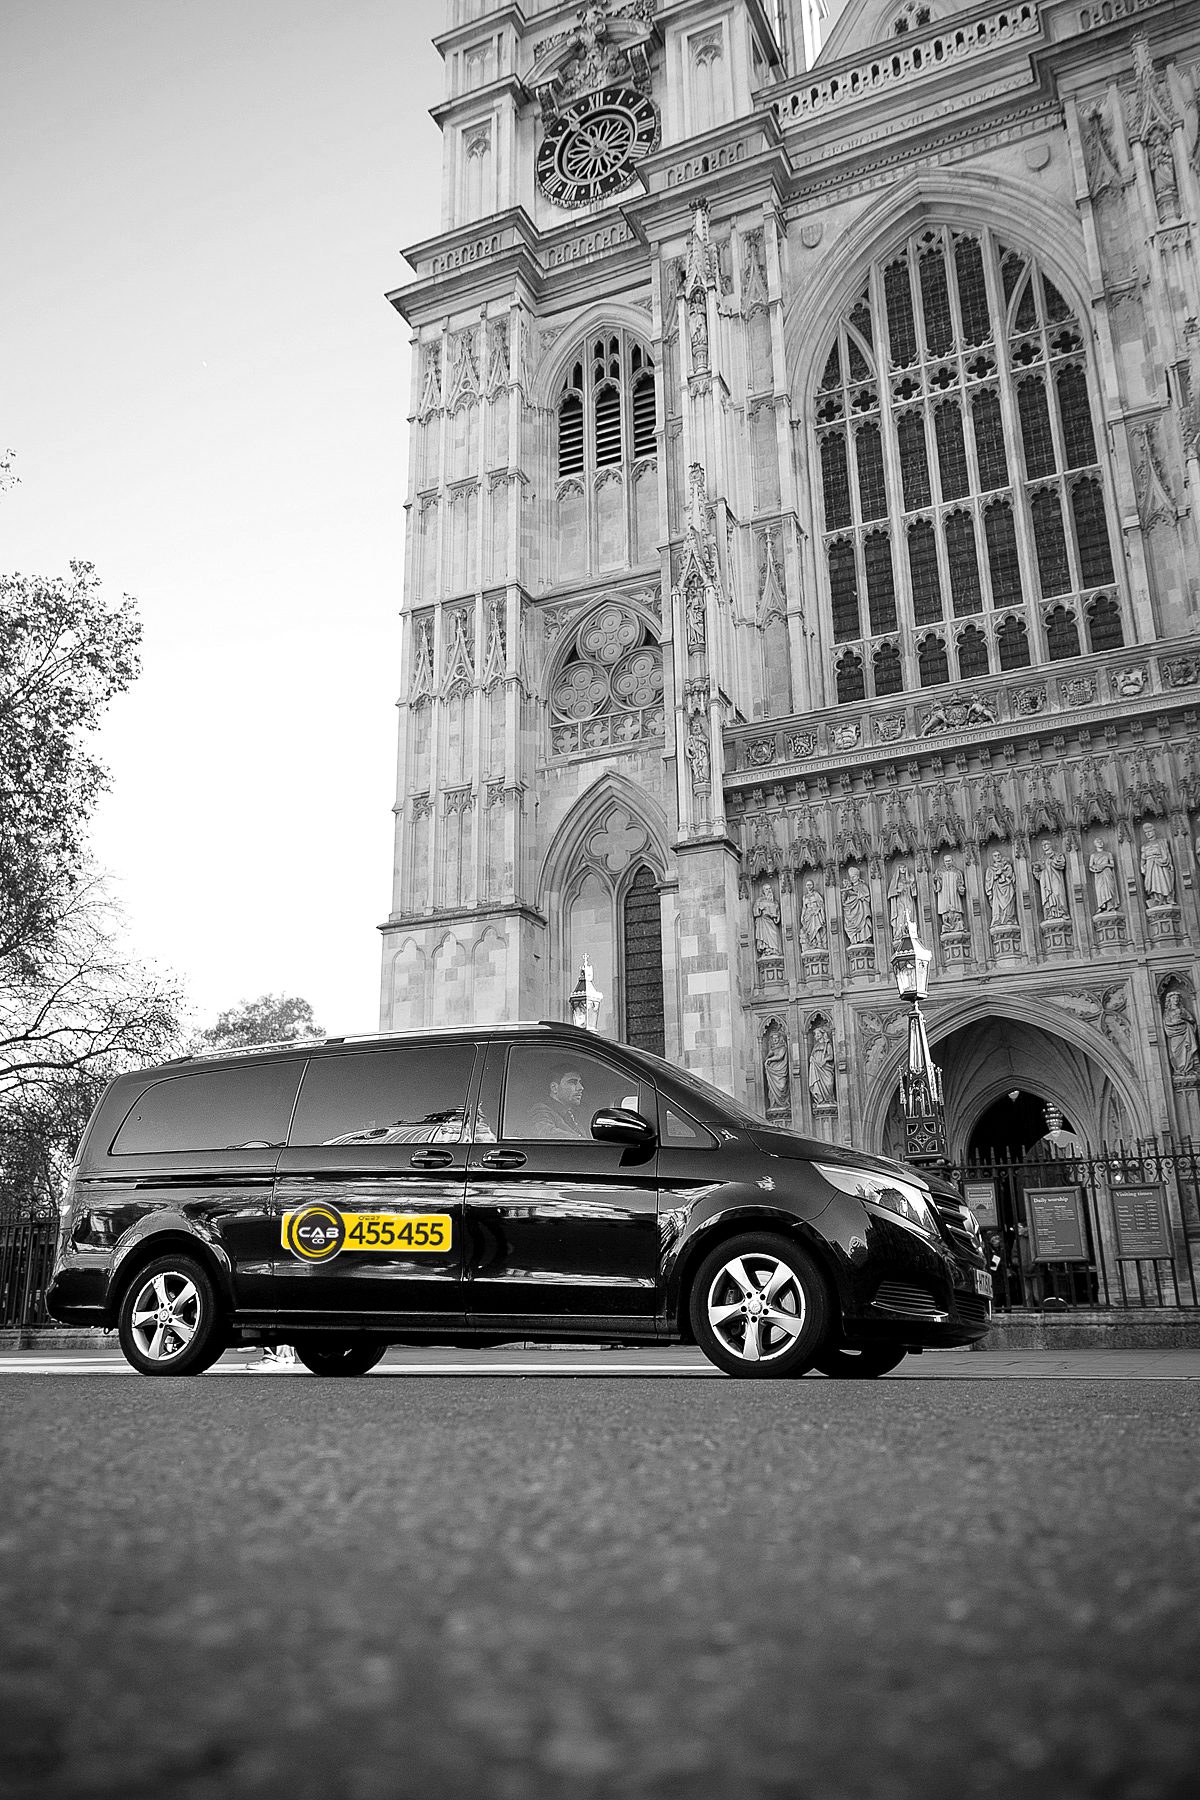 Taxi from Canterbury to London